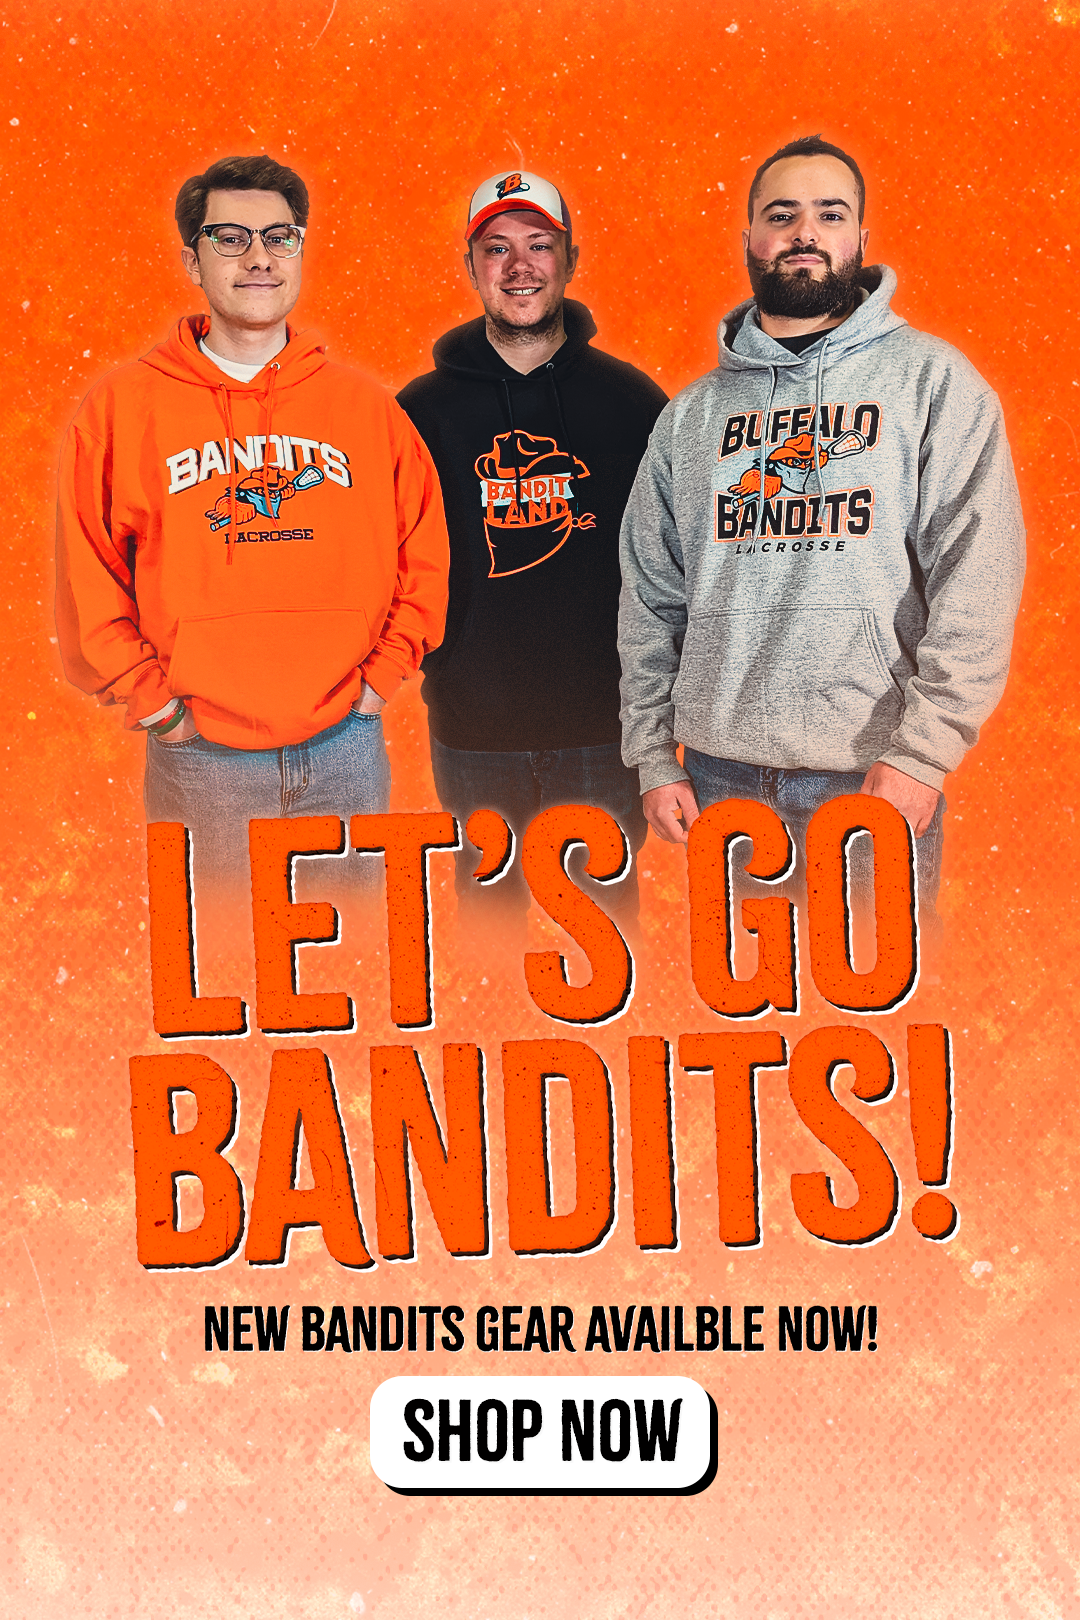 mobile web banner showing 3 guys posing and wearing buffalo bandits sweatshirts. the words on the screen say let's go bandits, new bandits gear available now.